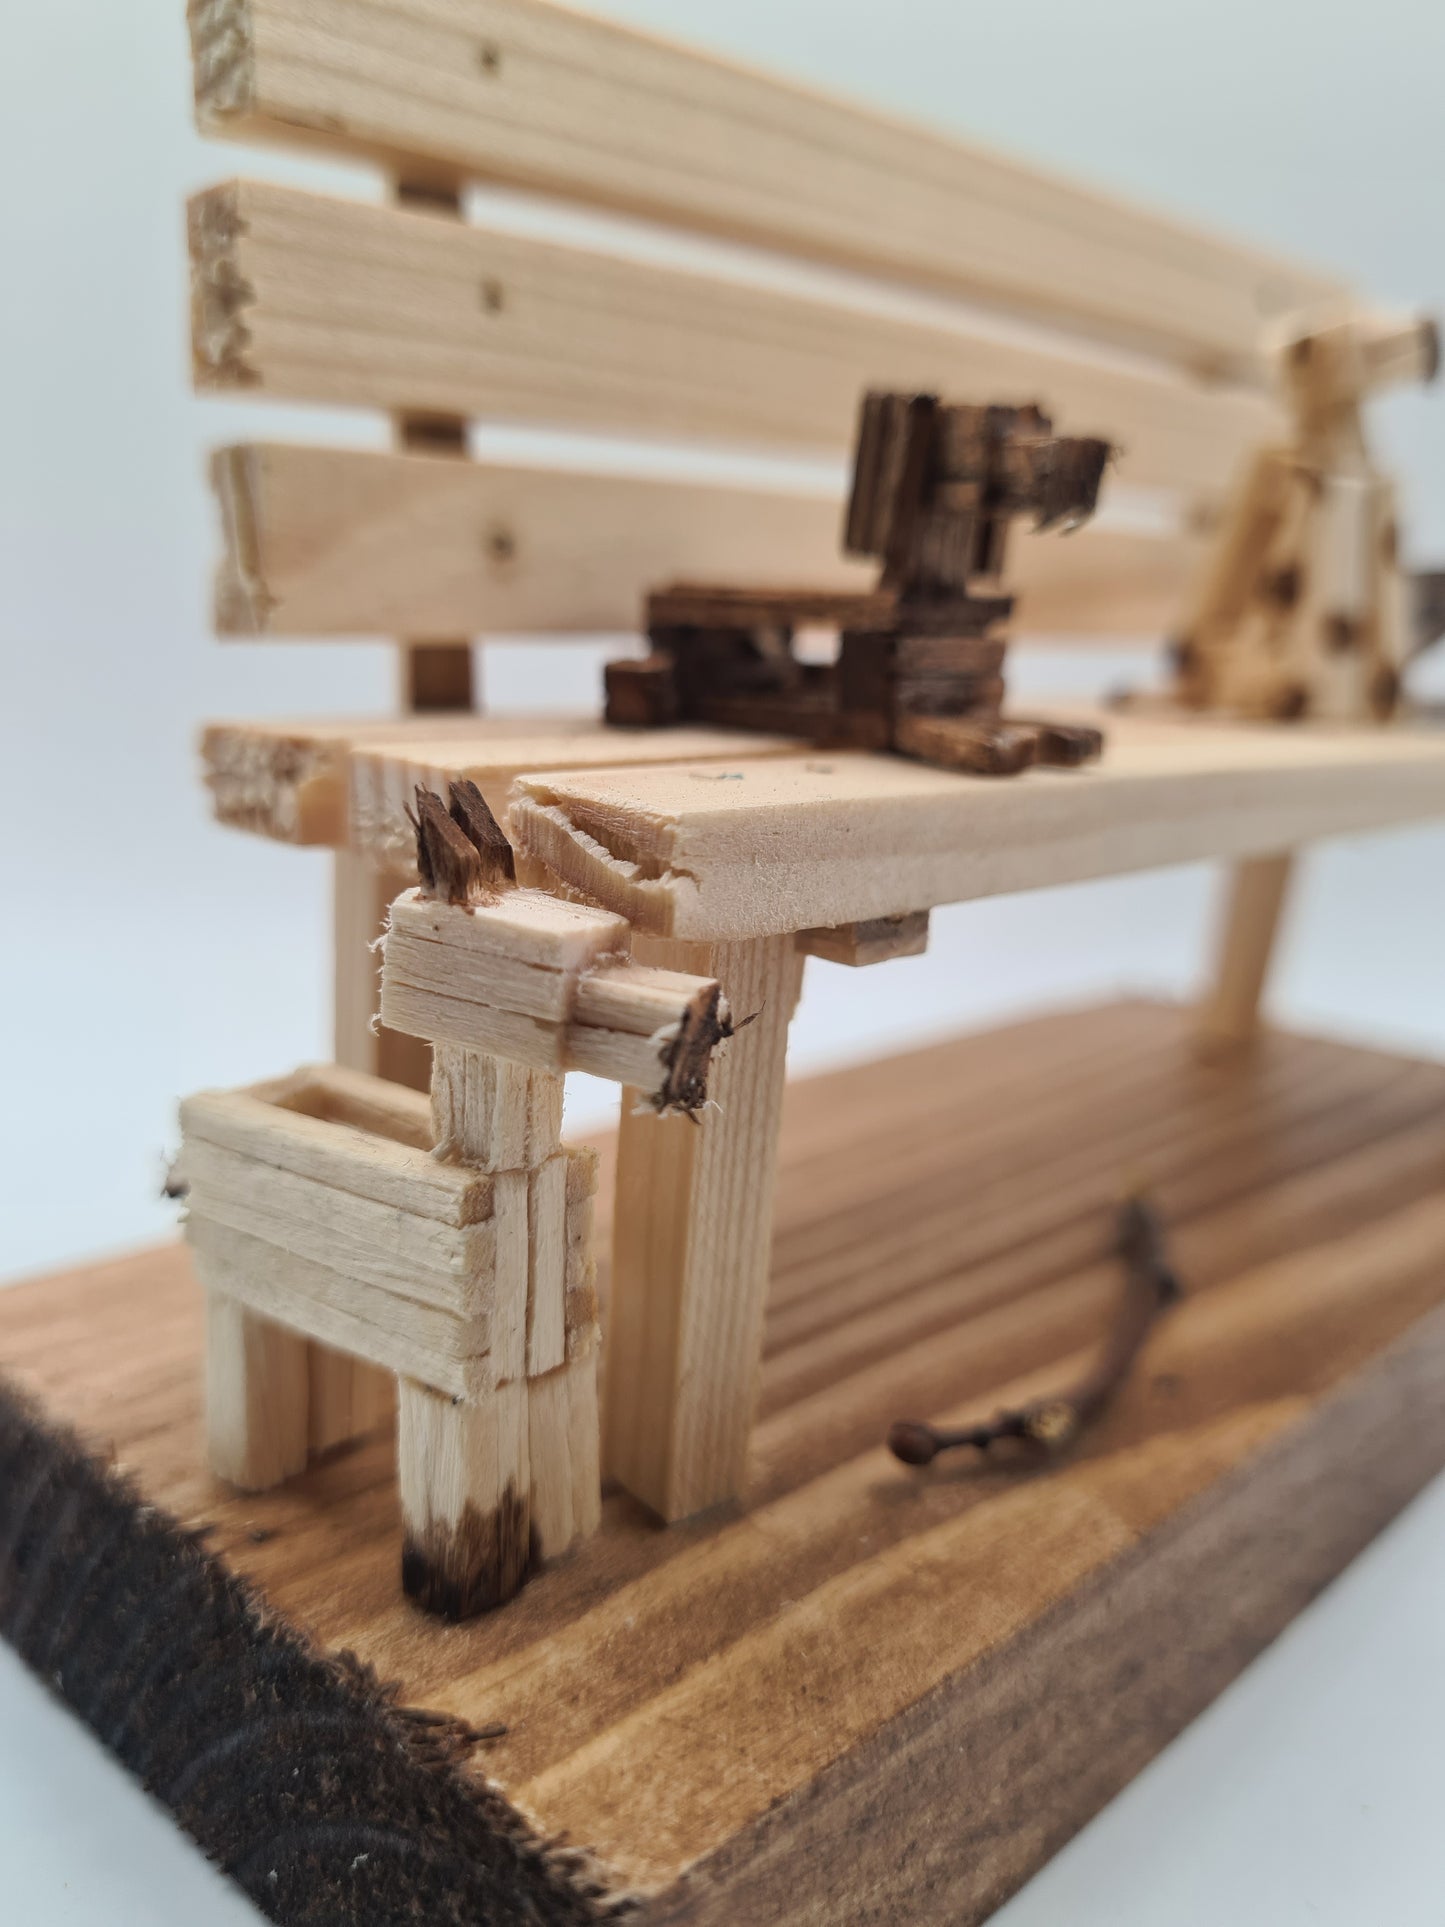 Doggos Take Over The Bench - Handcrafted Wooden Matchstick Figures - Gifts, Ornaments and Decor By Tiggidy Designs